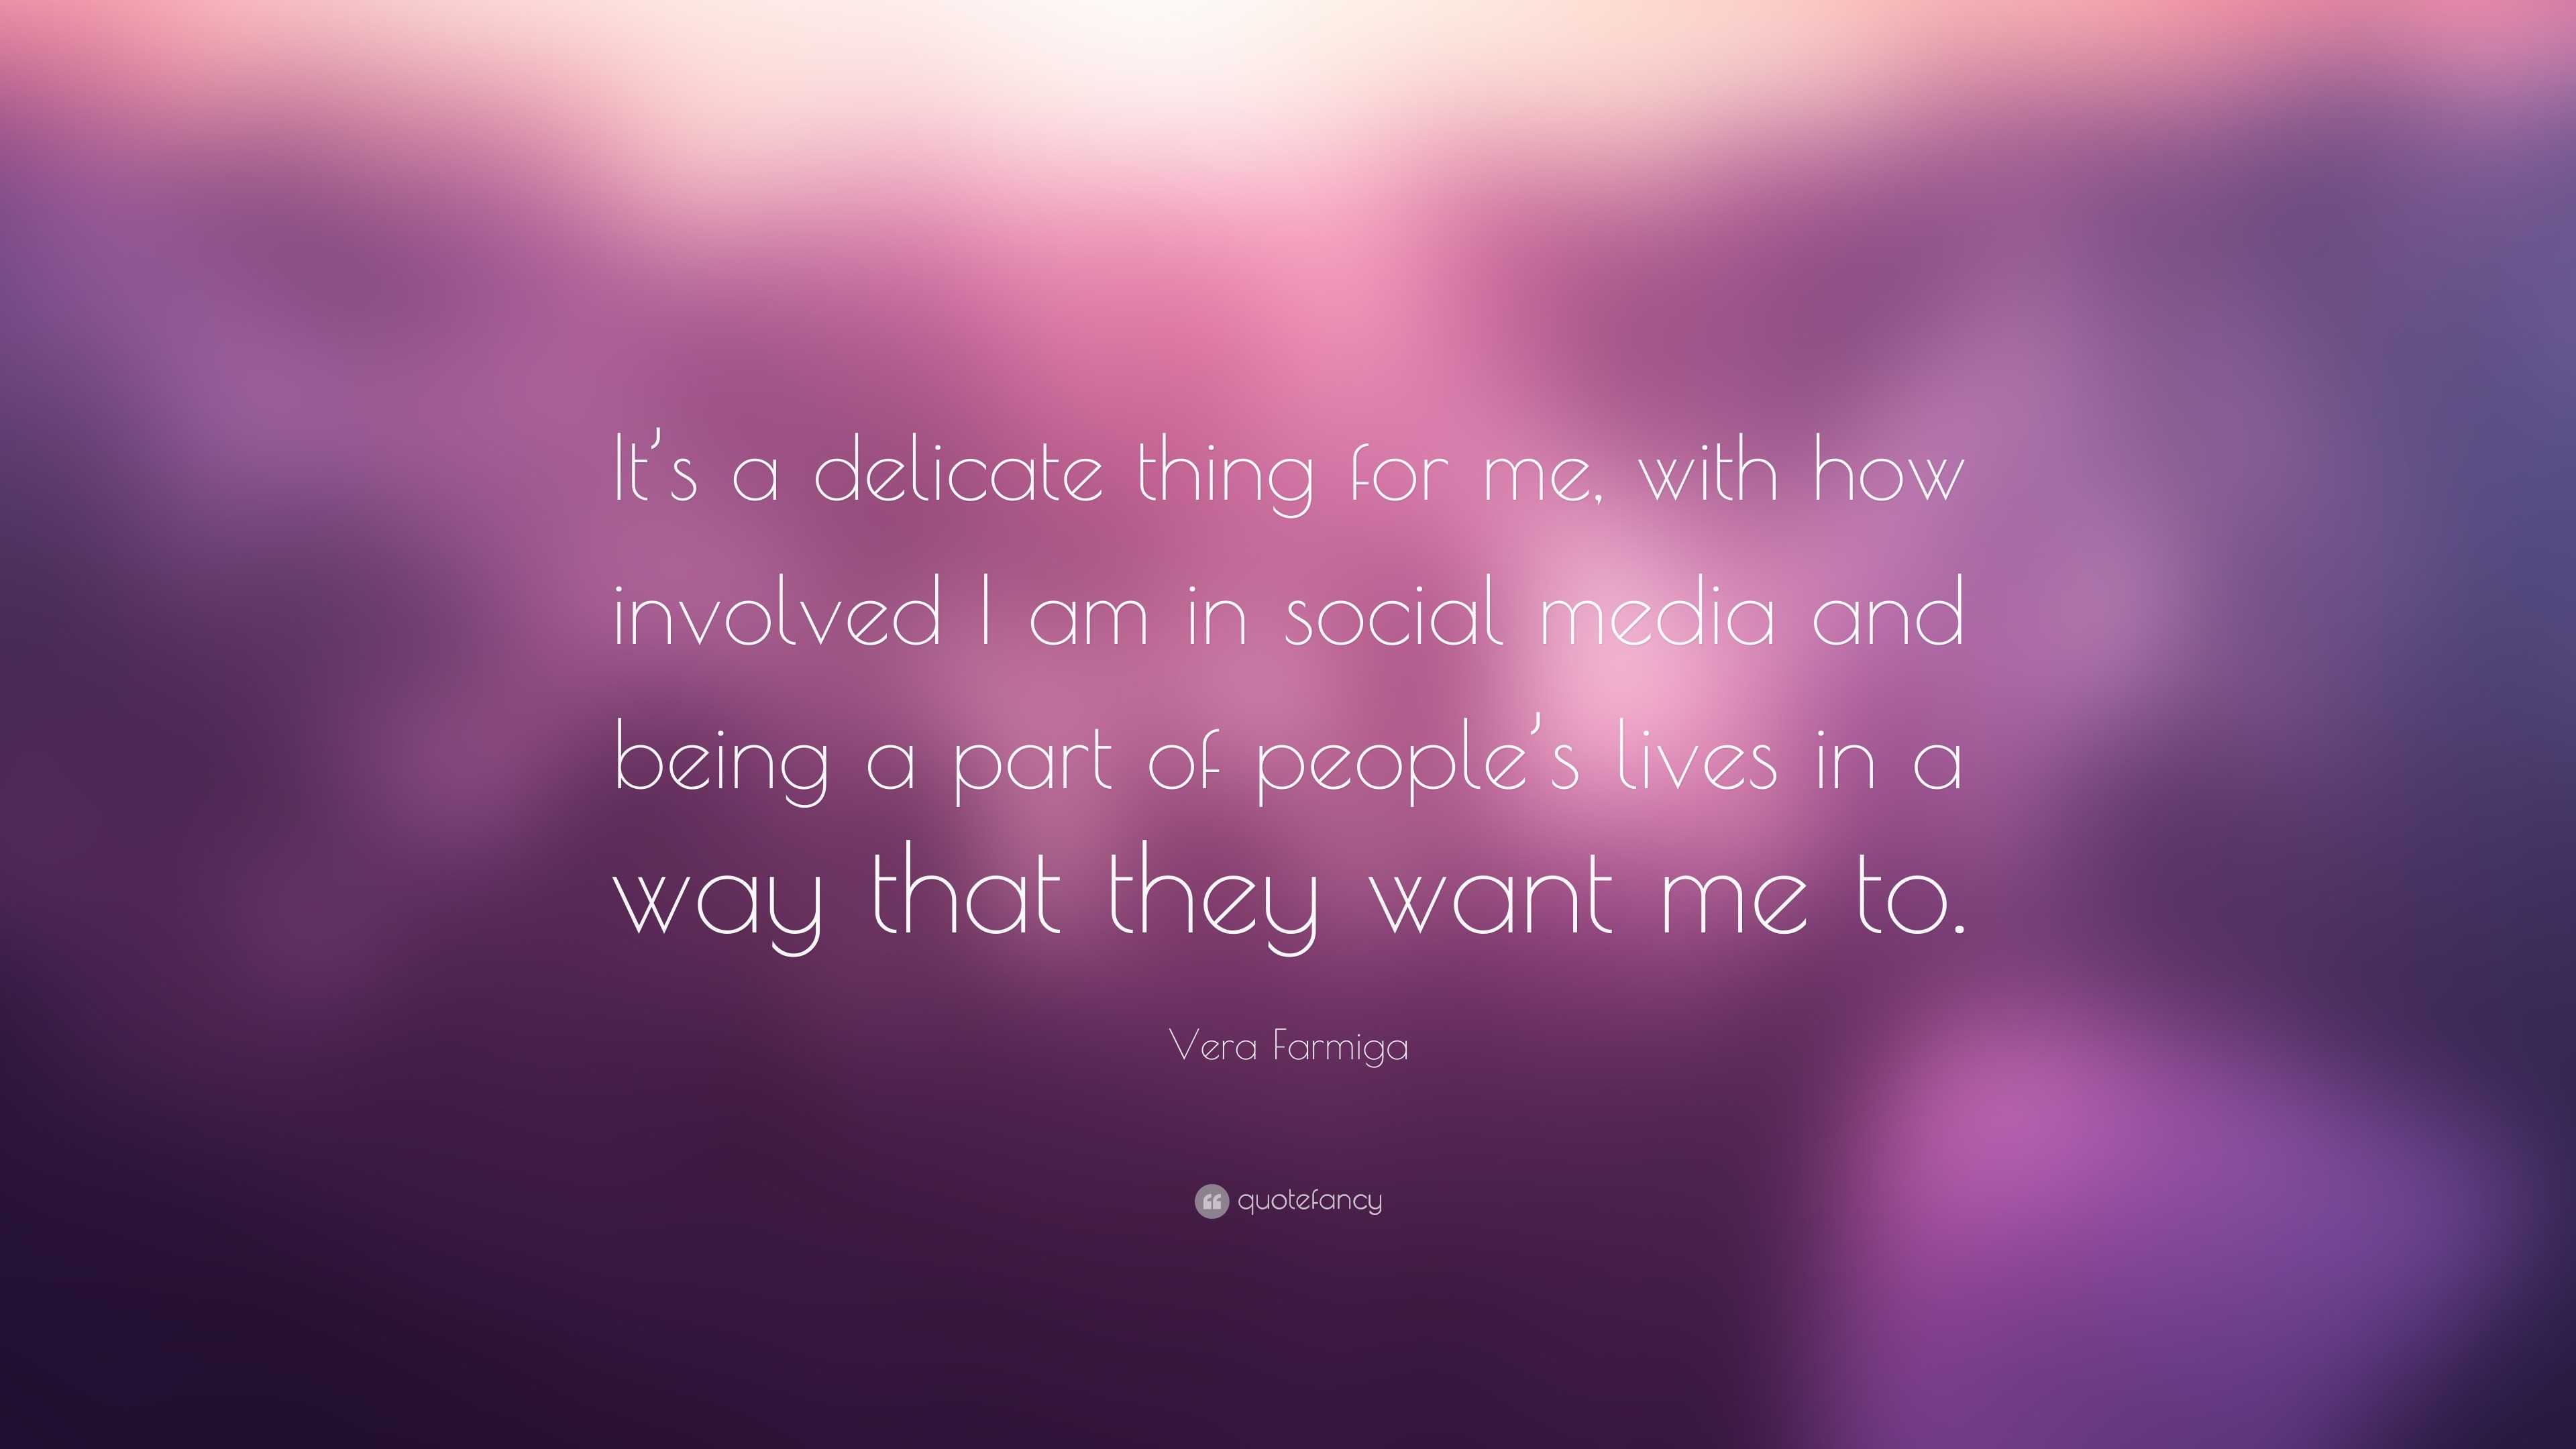 Vera Farmiga Quote: “It’s a delicate thing for me, with how involved I ...